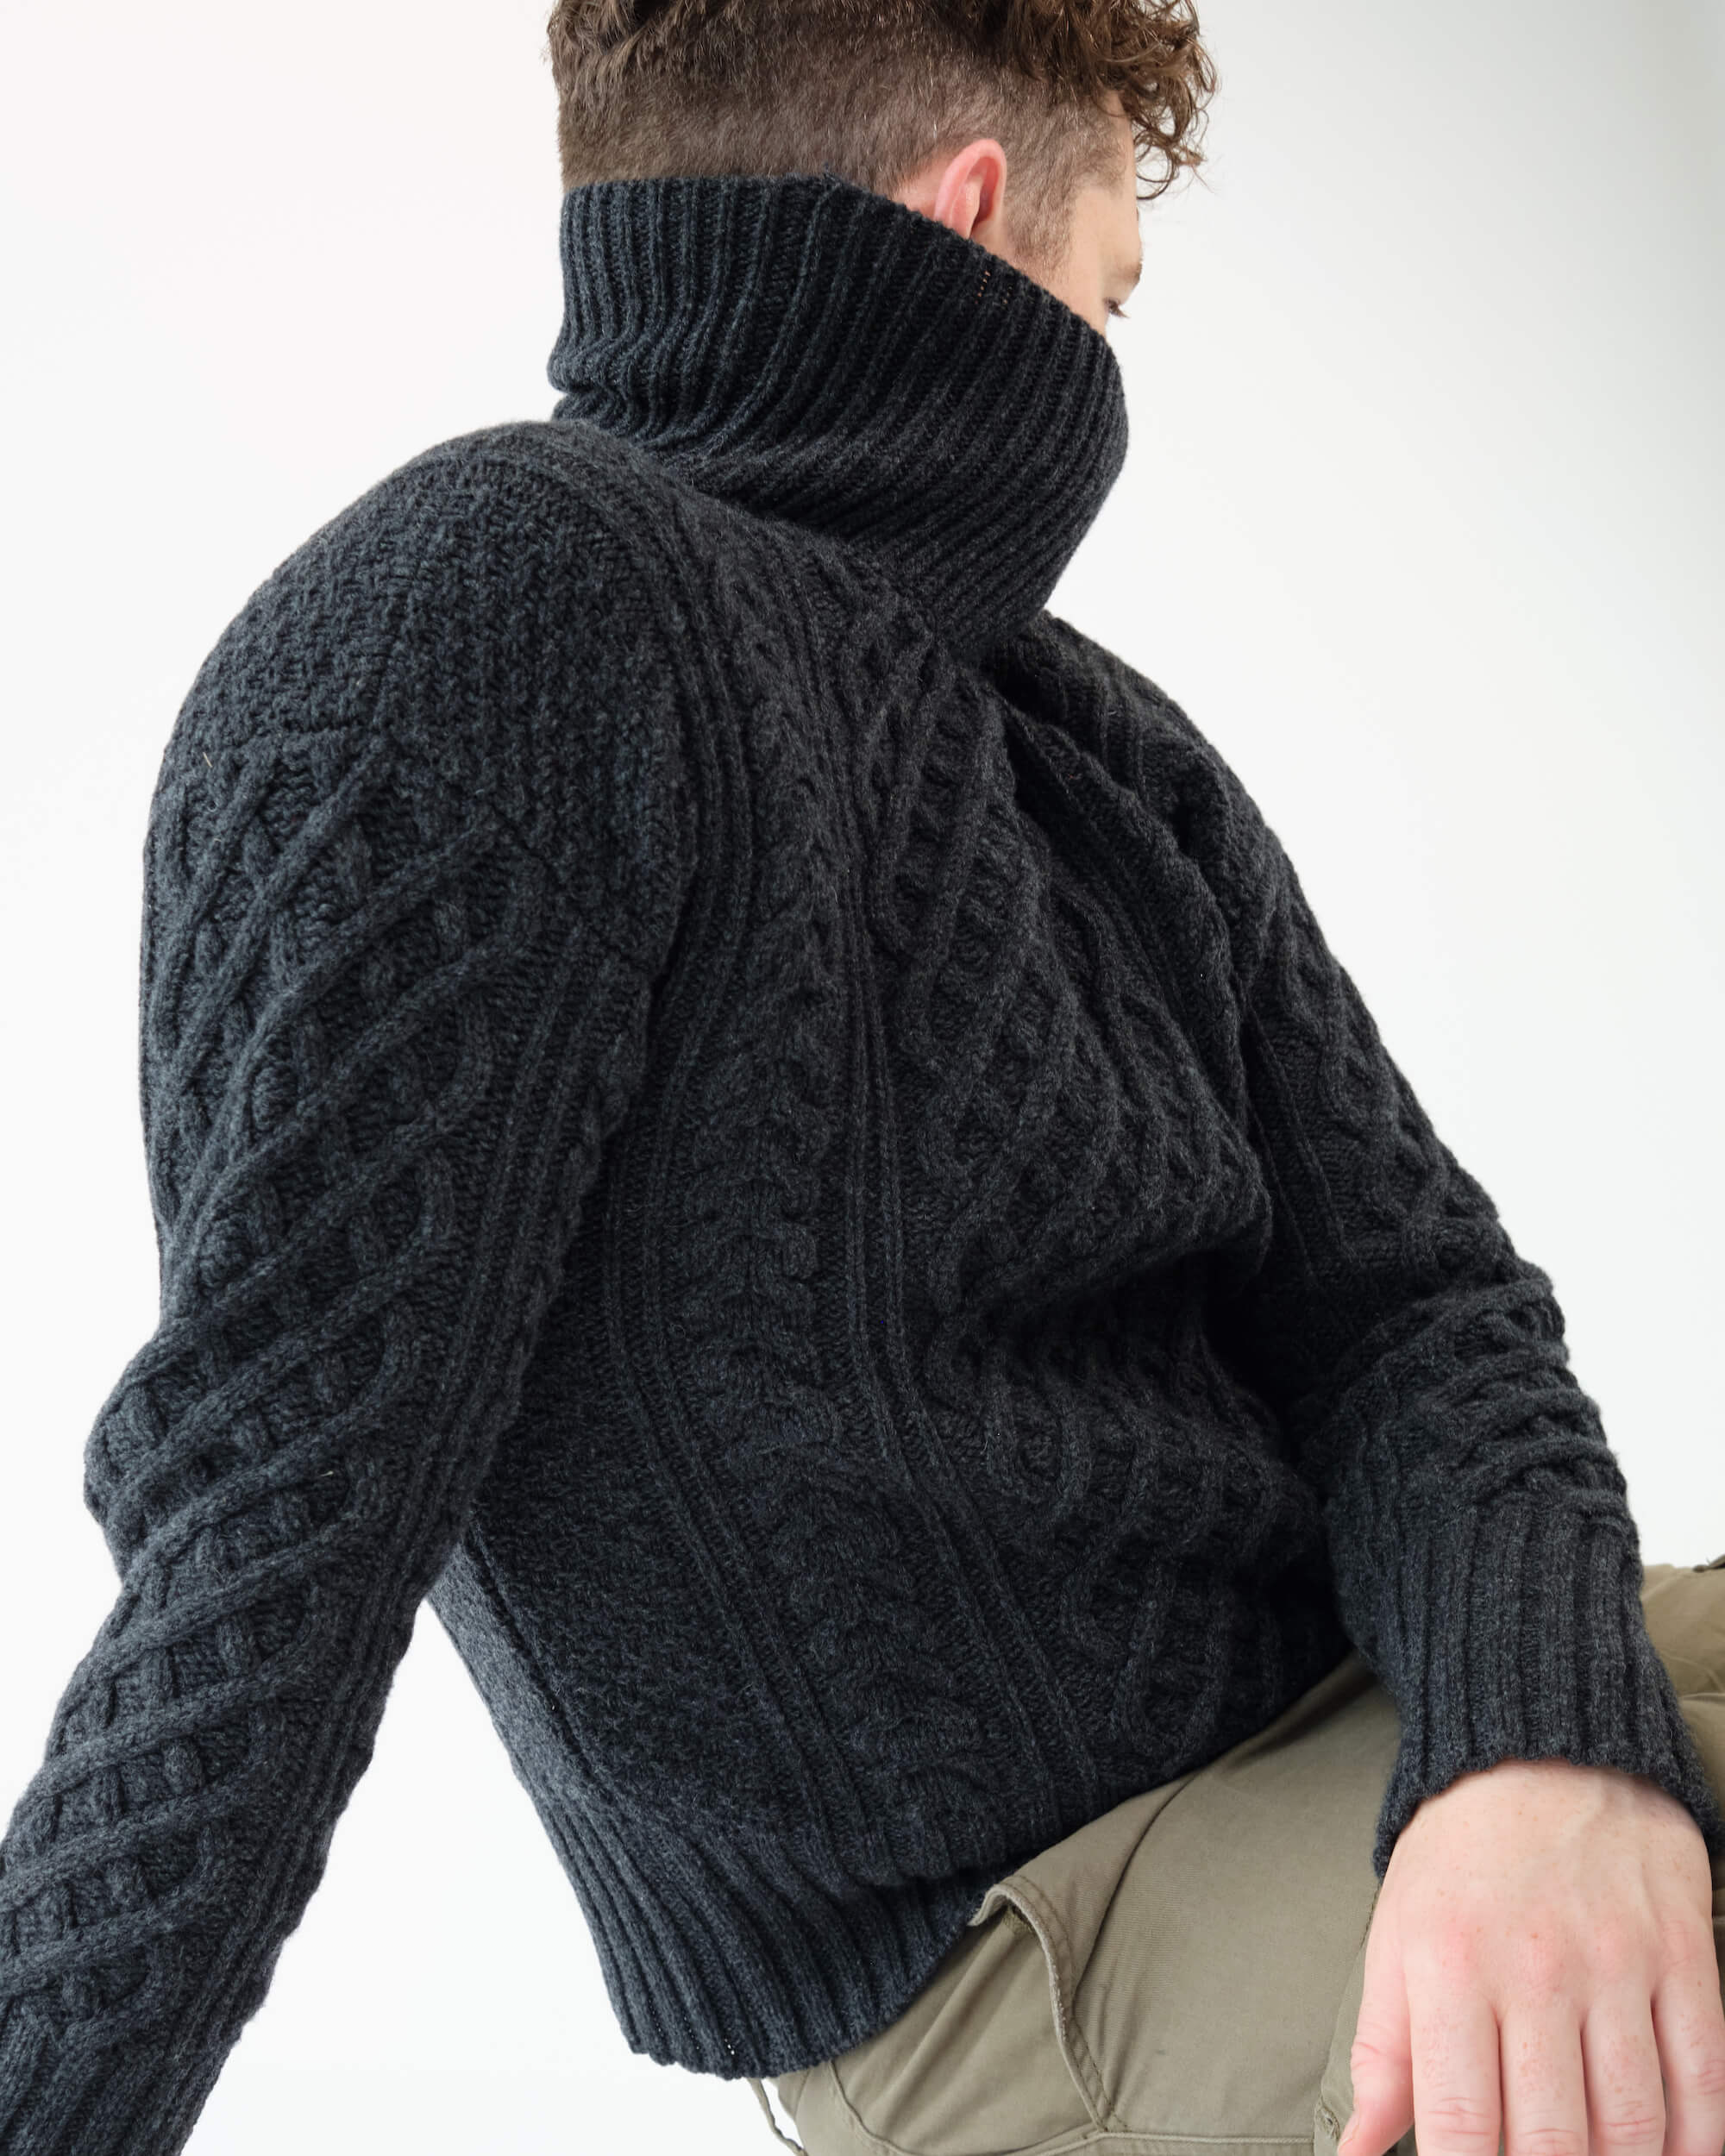 The Turtleneck Lambswool Aran – Moss + Cable